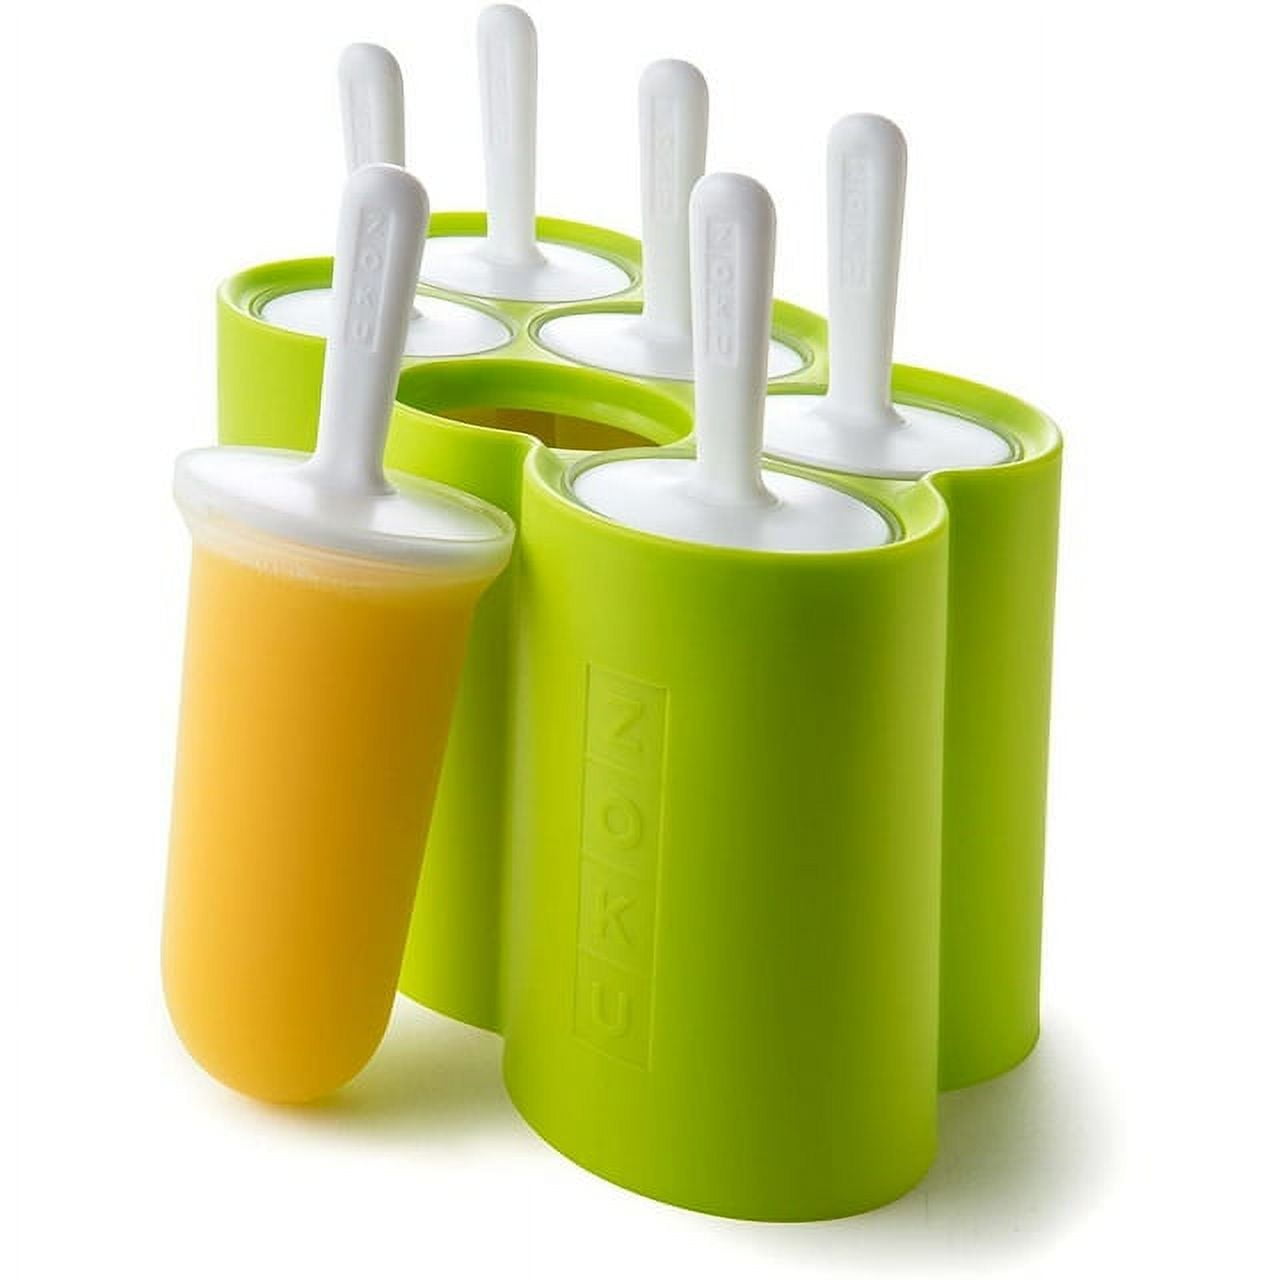 Norpro Traditional Popsicle Mold - Whisk